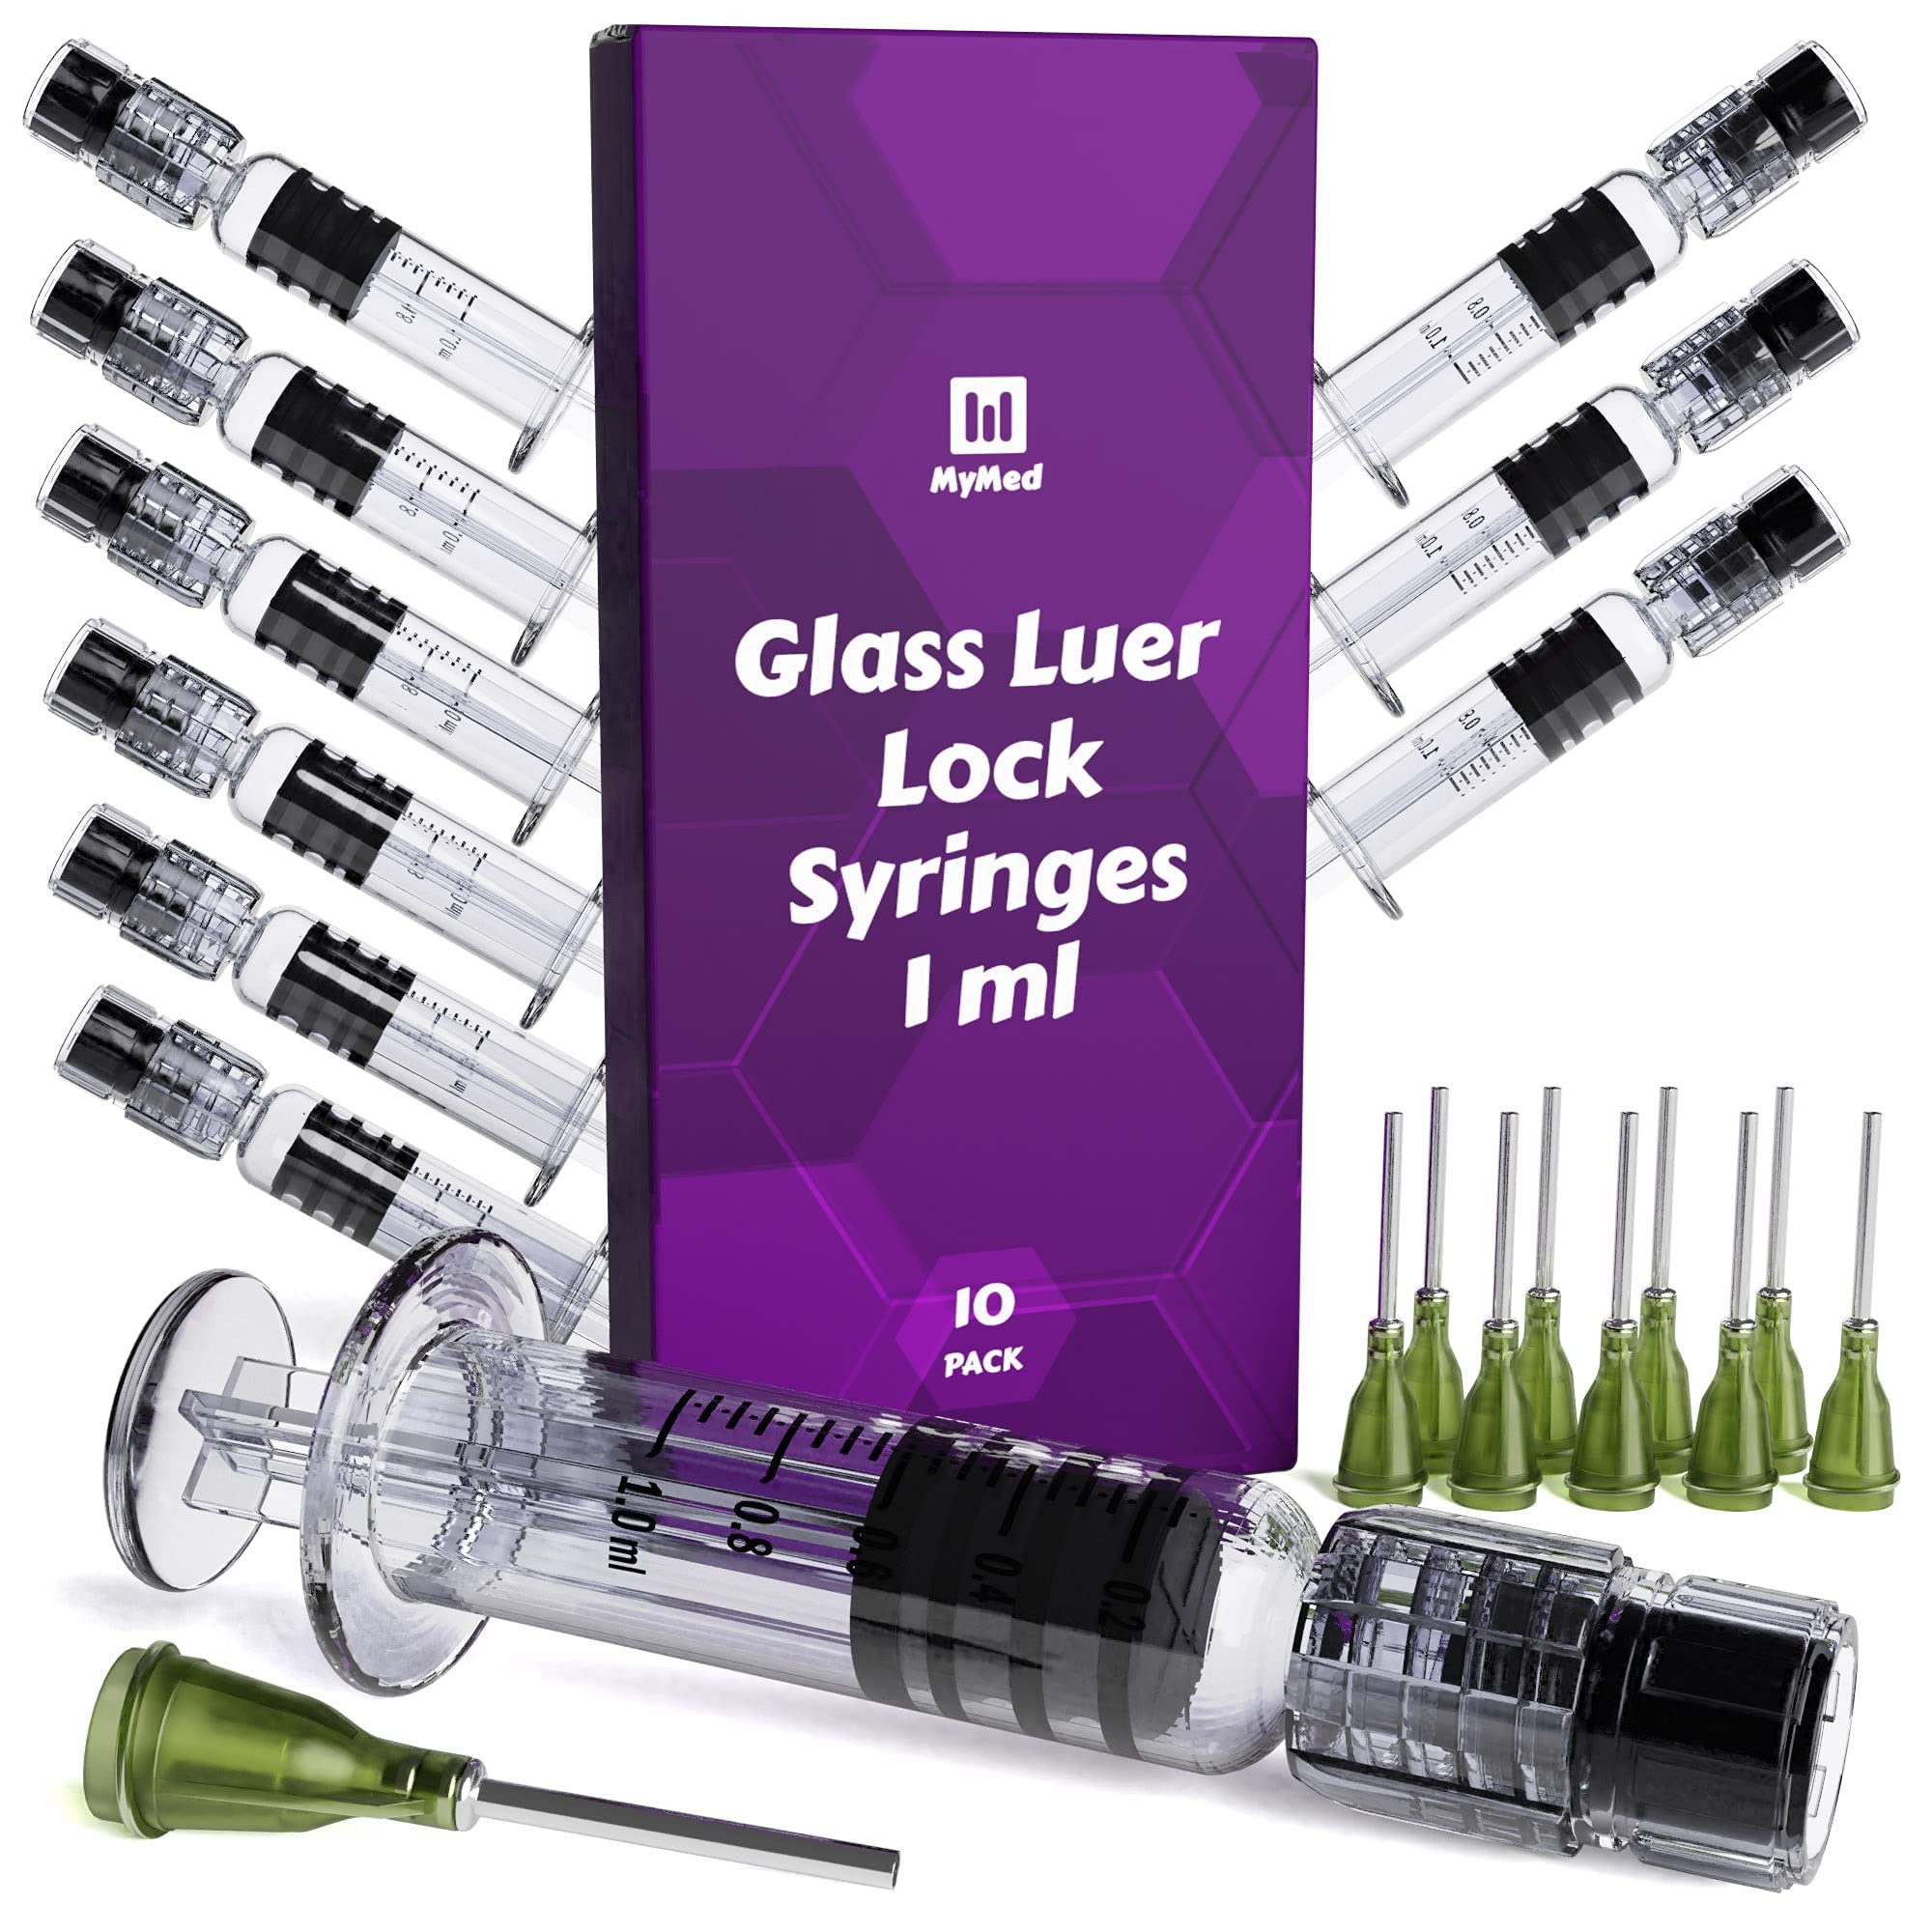 MyMed 10 Pack Borosilicate Glass Luer Lock Syringe 1ml Capacity Reusable  Glass Syringes - Use for Arts and Crafts, Thick Liquids, Oils, Vet, Glue,  Lab, Ink with 10GA Blunt Tip Pet Safe Needles